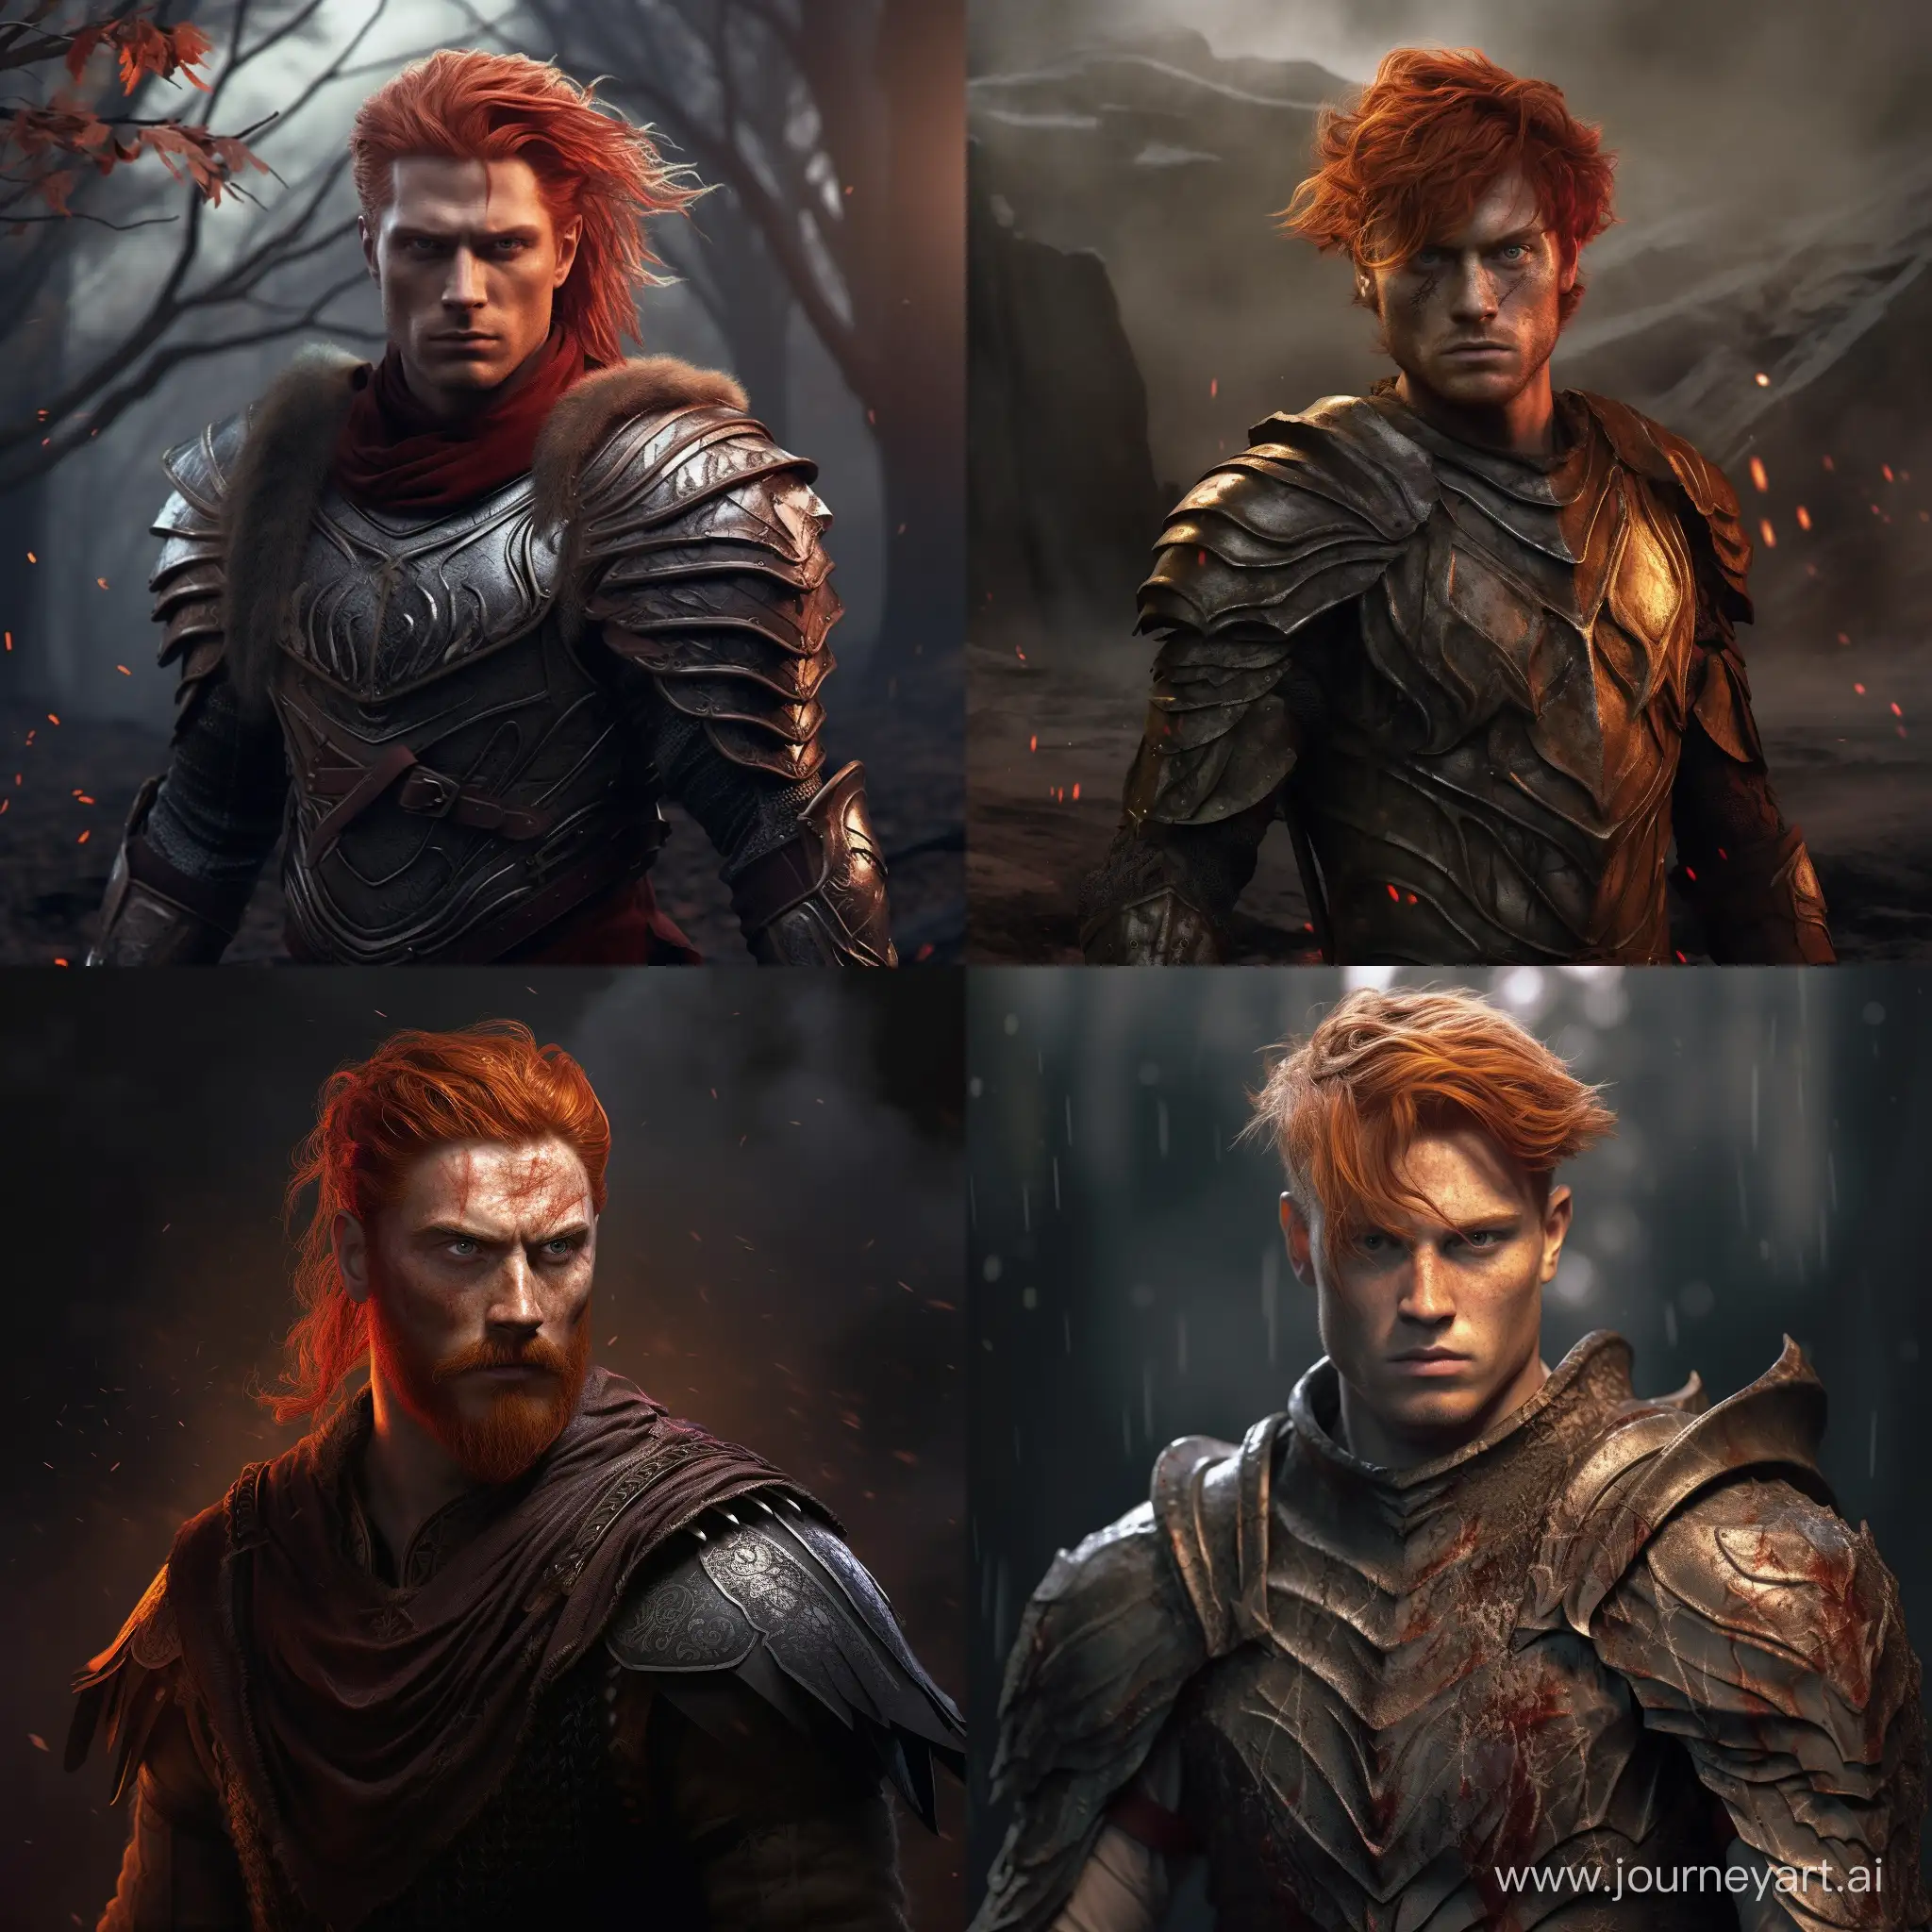 Epic-RedHaired-Male-Warrior-with-Lightning-Elements